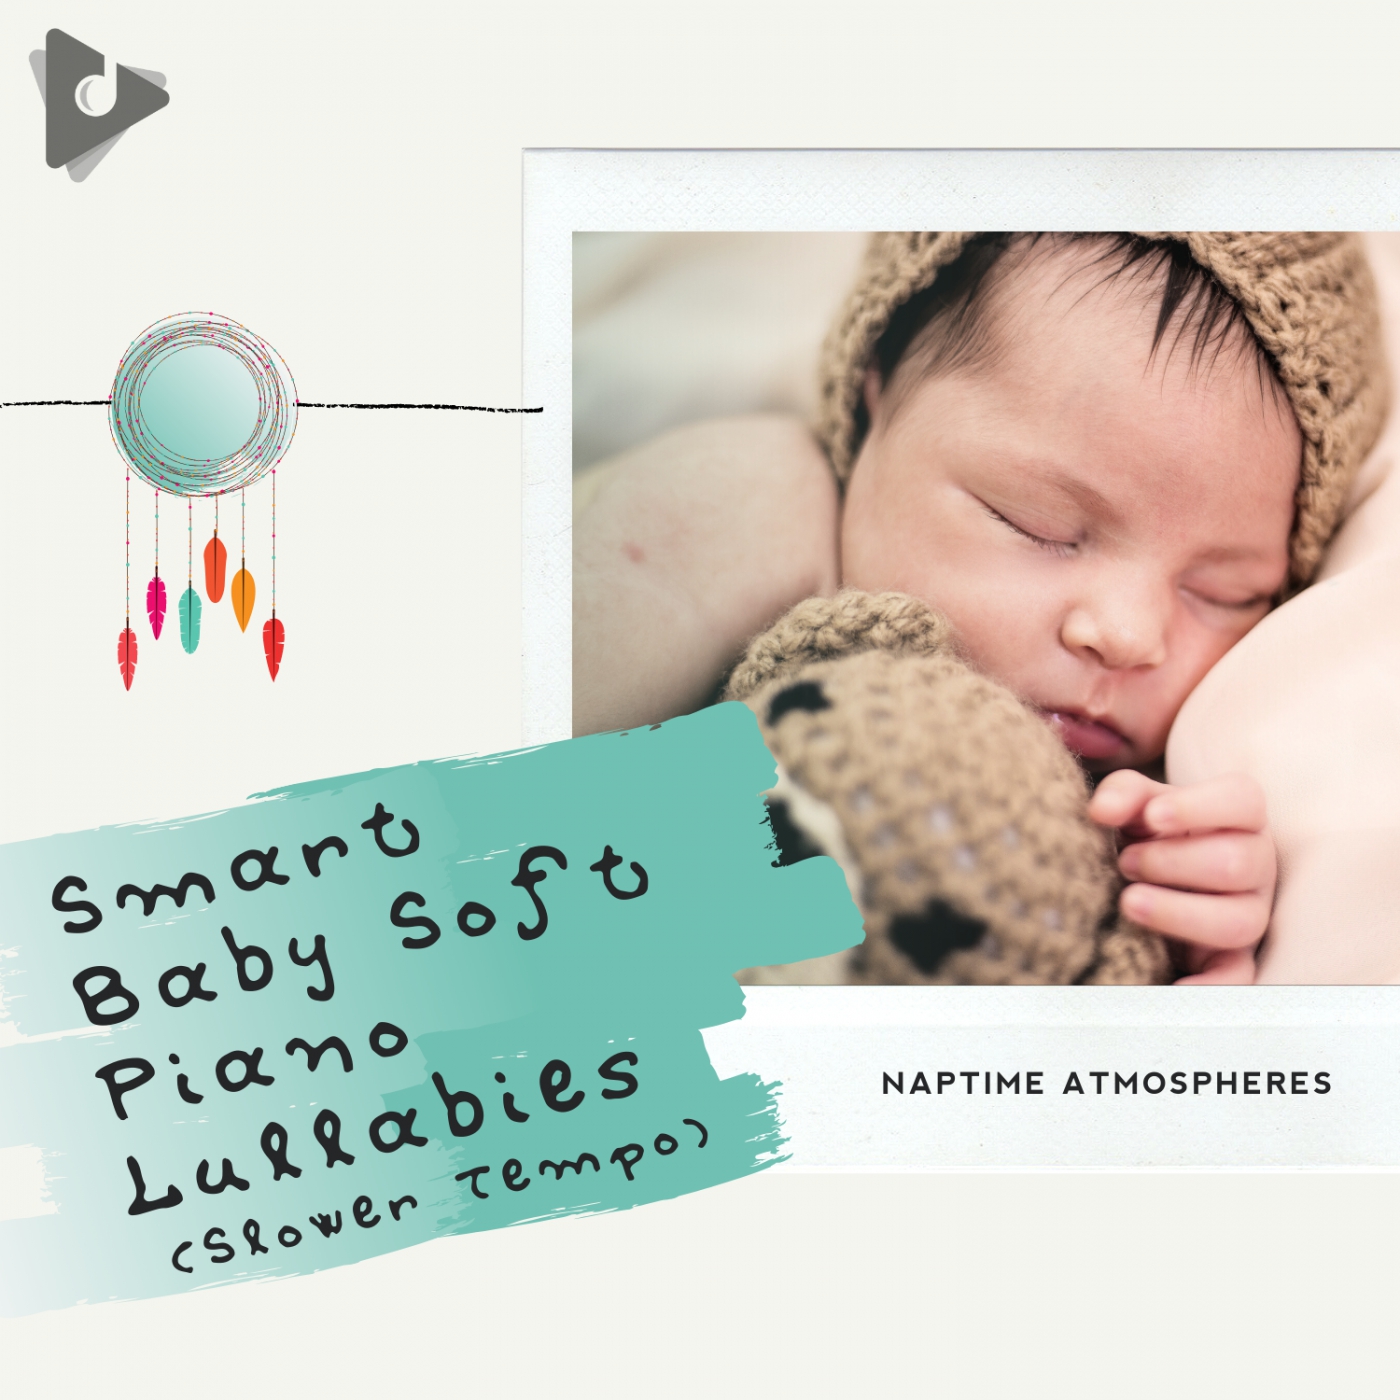 Smart Baby Soft Piano Lullabies (Slower Tempo)